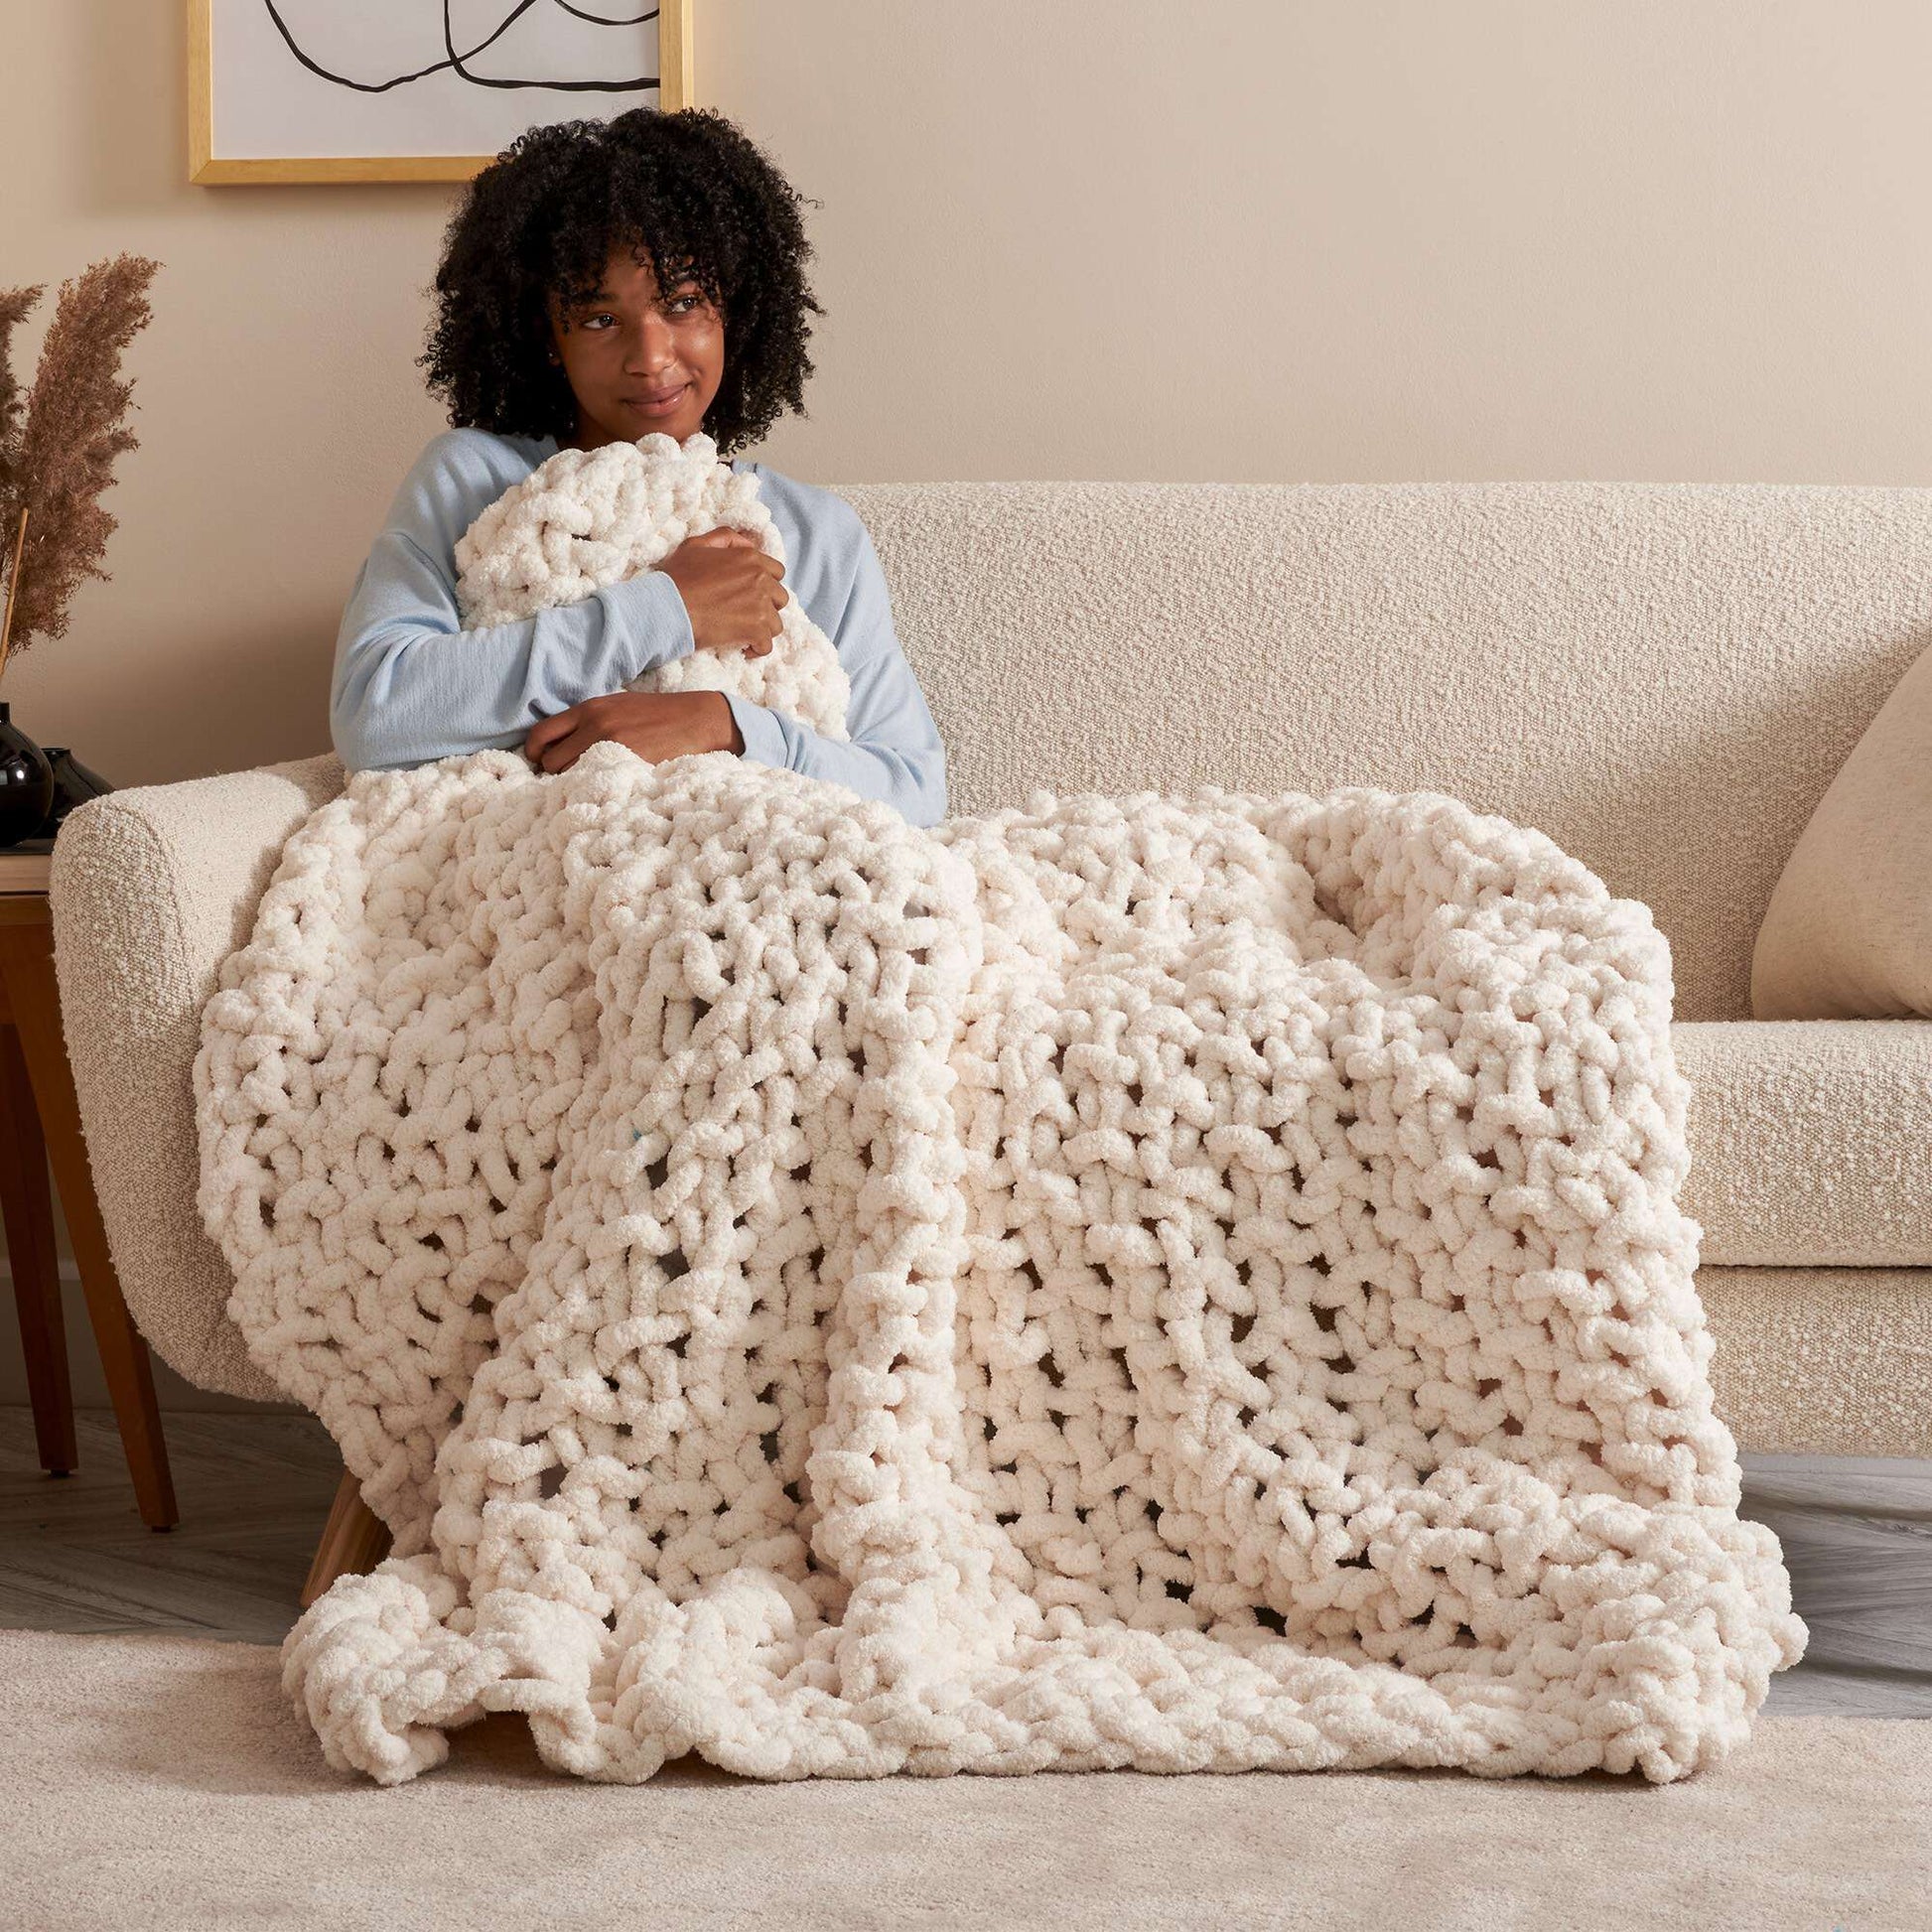 Looking for patterns to use for this Bernat blanket yarn, I